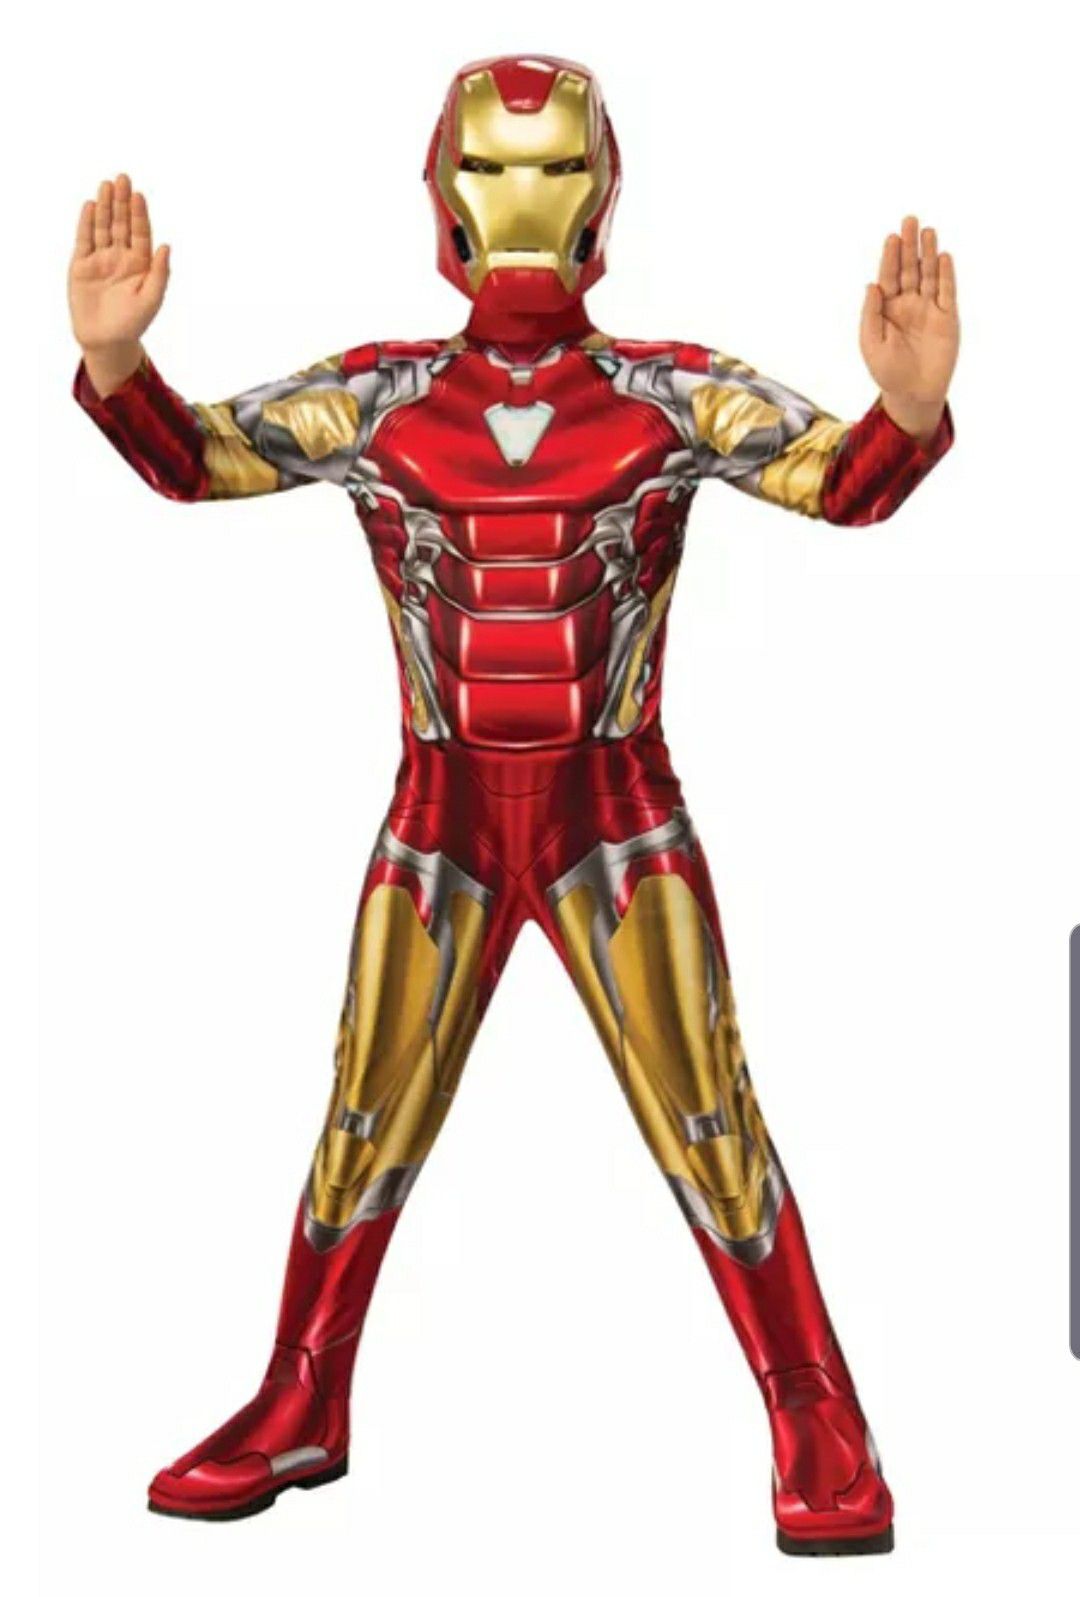 Marvel Iron Man Costume Small Age 4 to 6